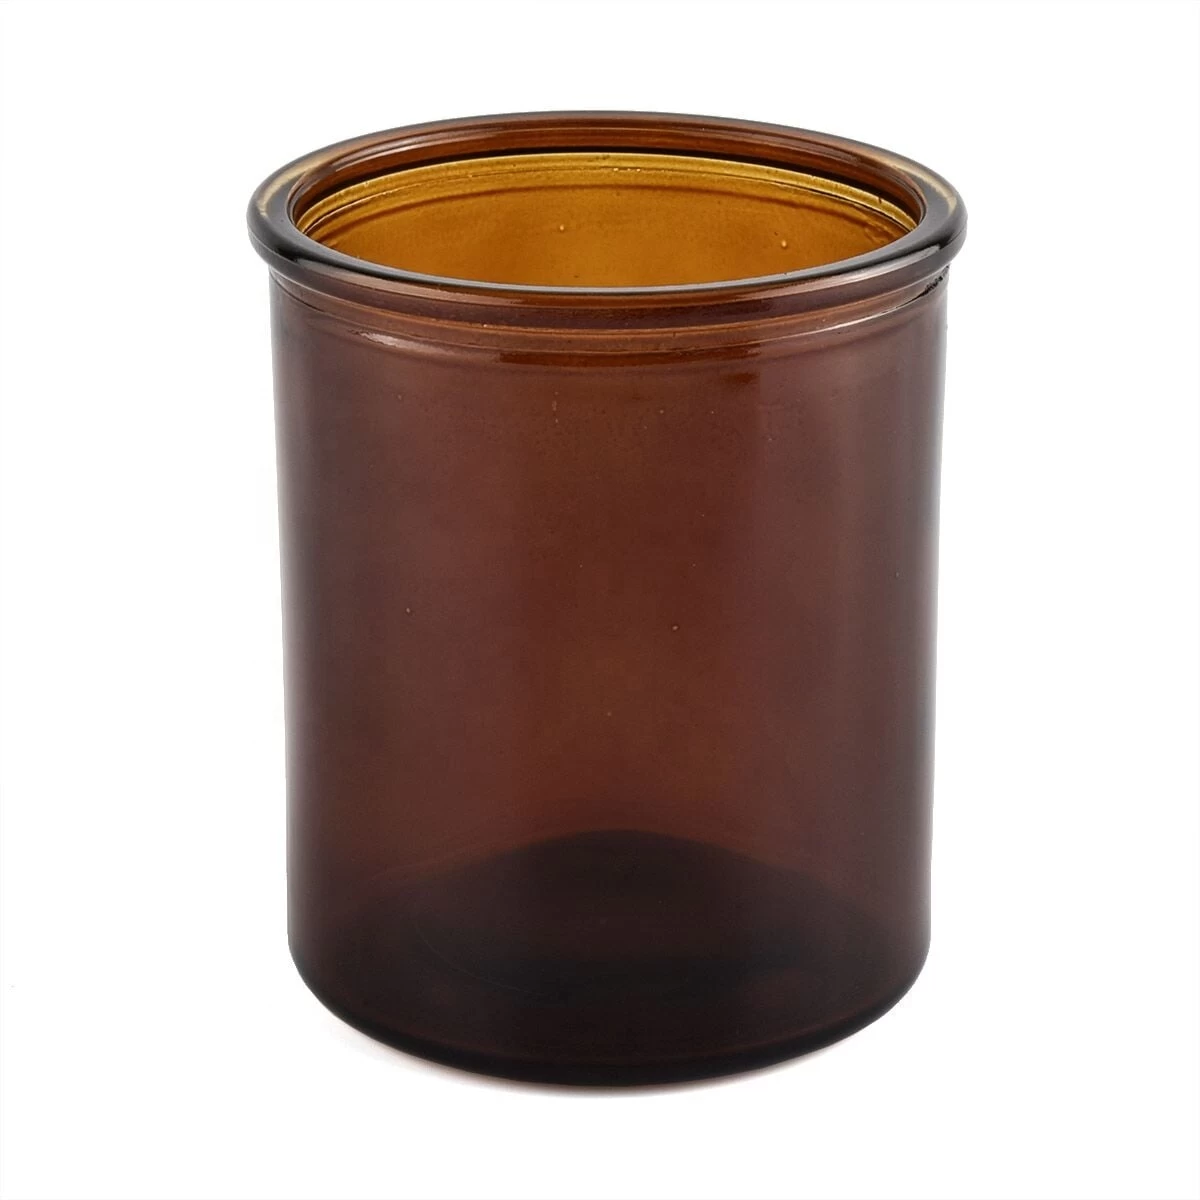 Amber color 15oz glass candle jar with cork lid